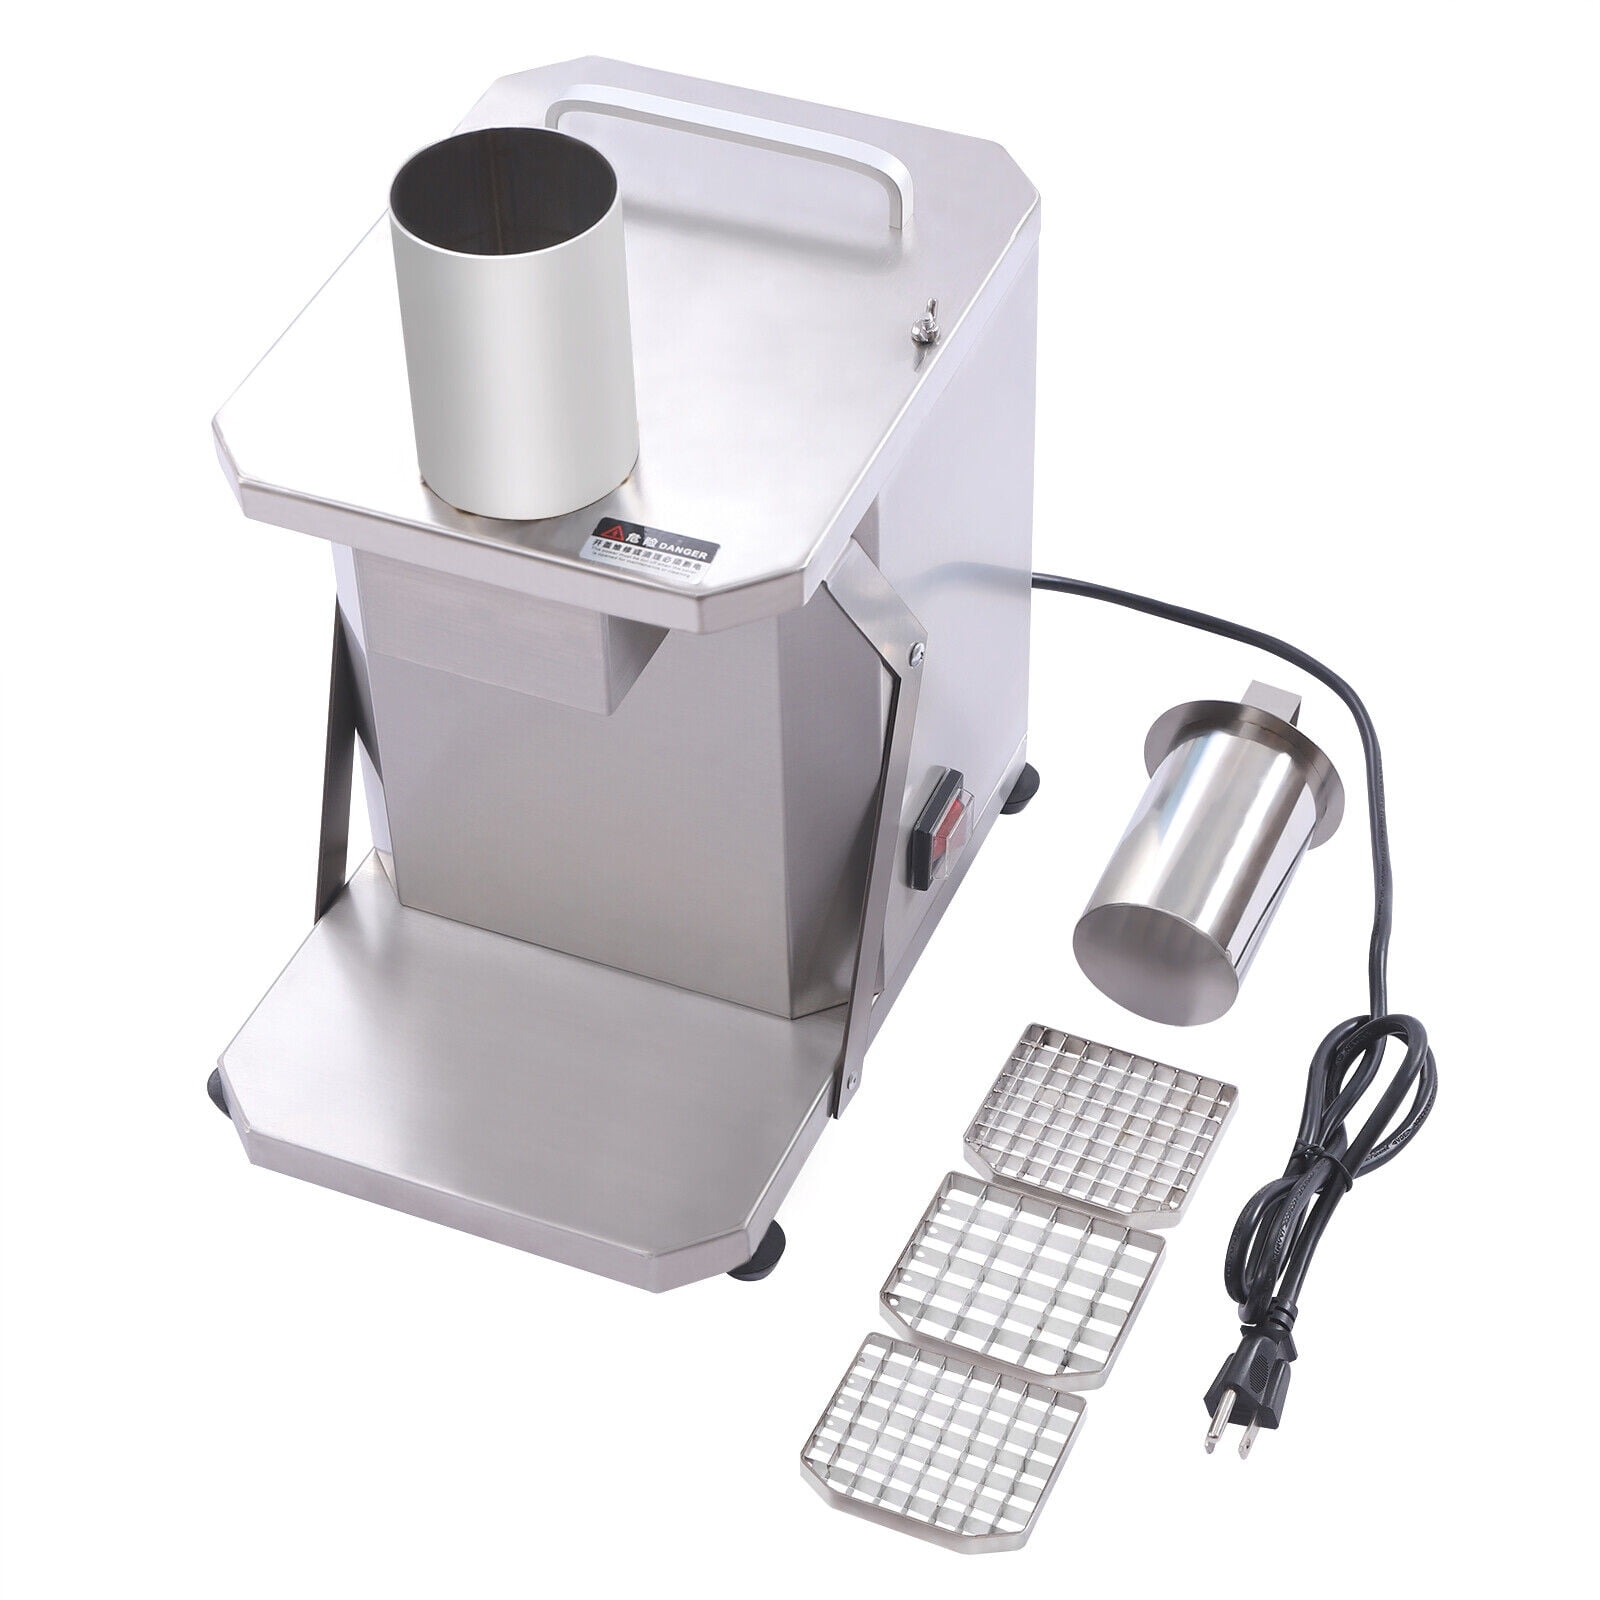 Commercial Vegetable Chopper Automatic Fruit Dicing Machine With  6/8/10/12/15mm Blades, 5 In 1 Electric Food Dicer for Potatoes Carrots  Cubes